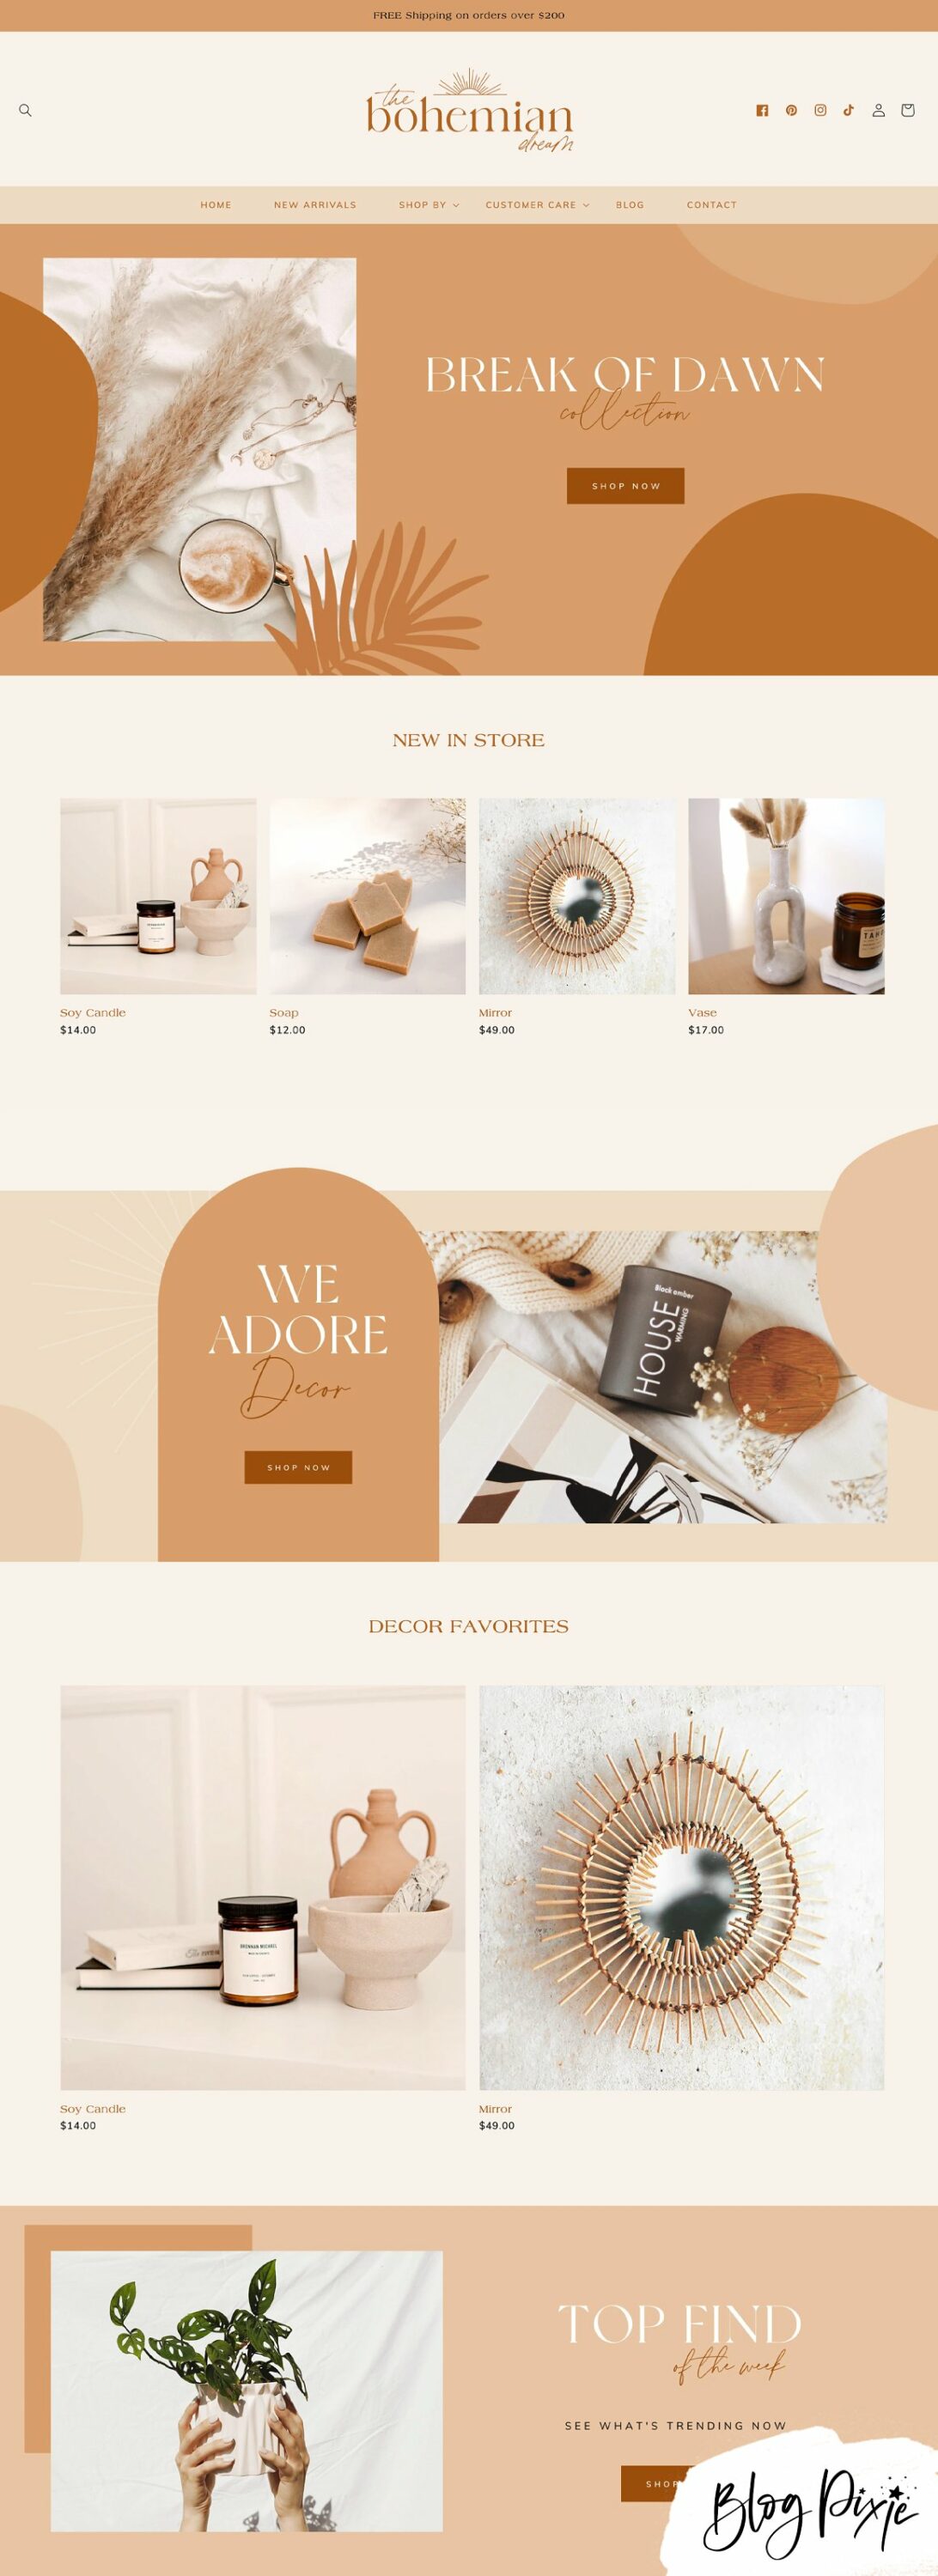 Page image of exquisite Shopify theme in pastel colors.